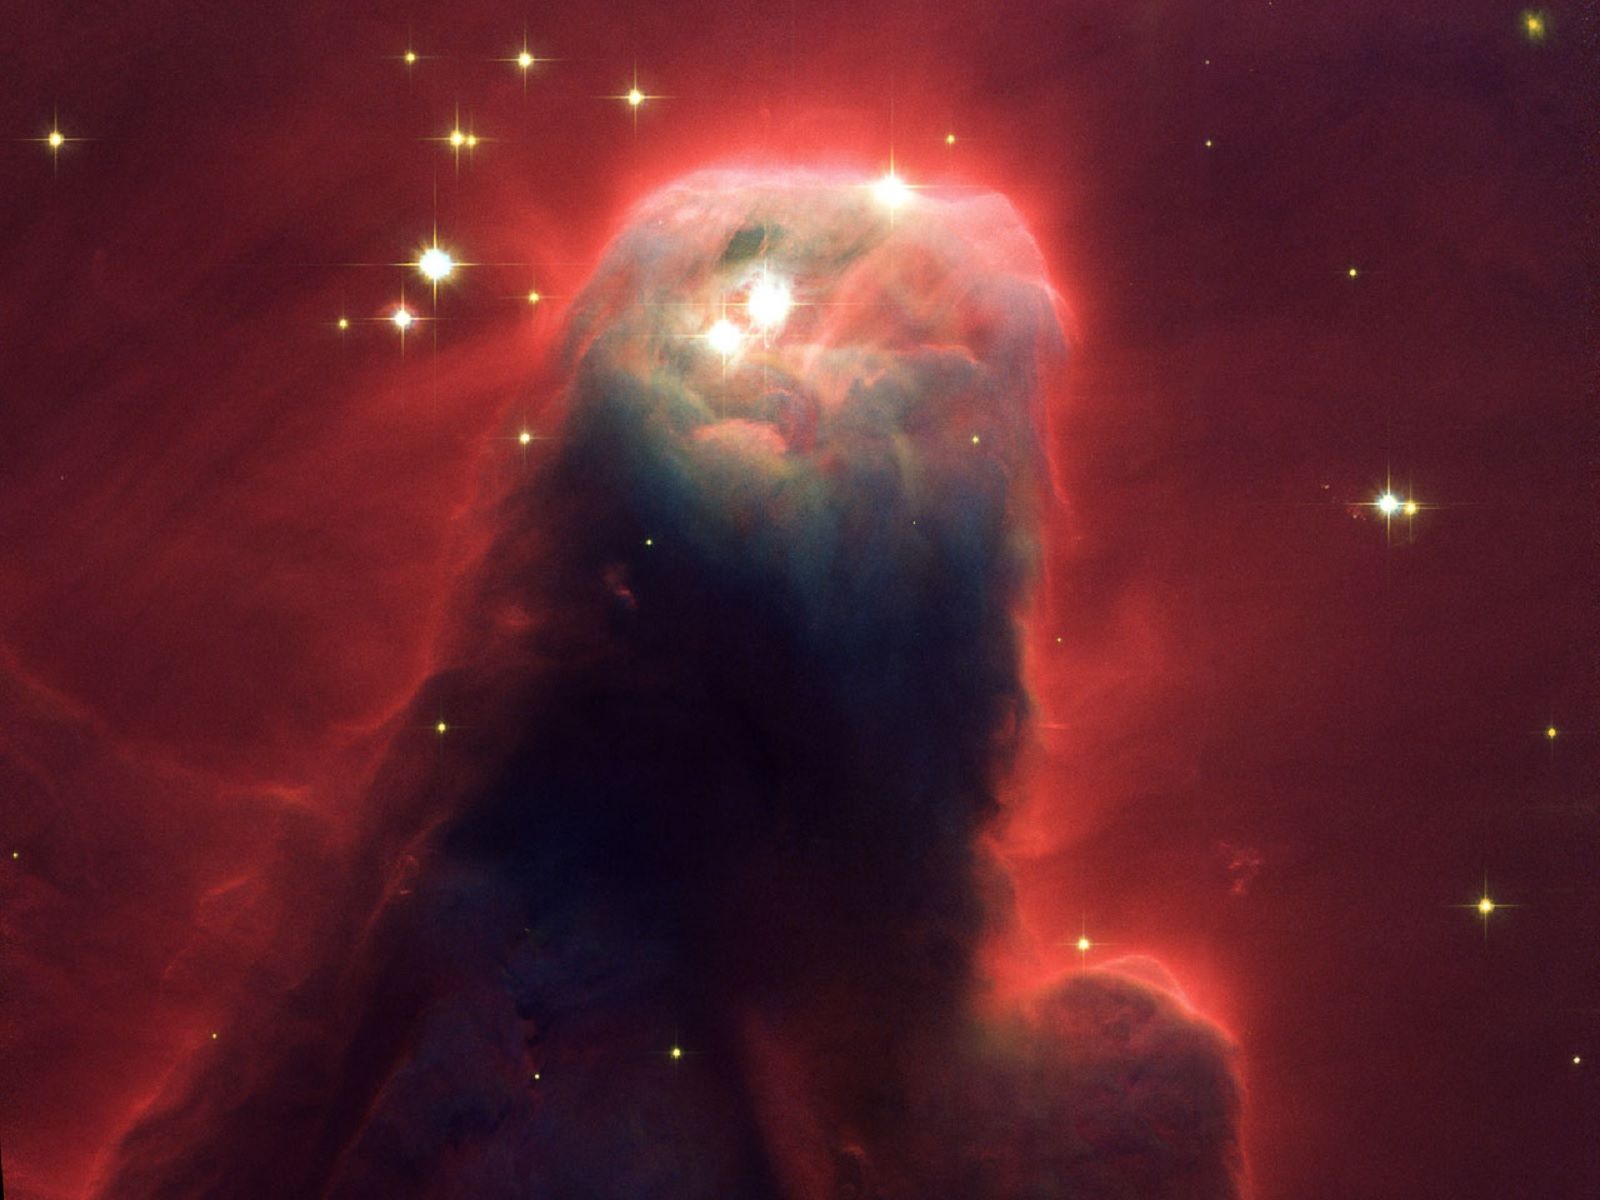 astounding images from the depths of the universe courtesy of the hubble space telescope photo 33